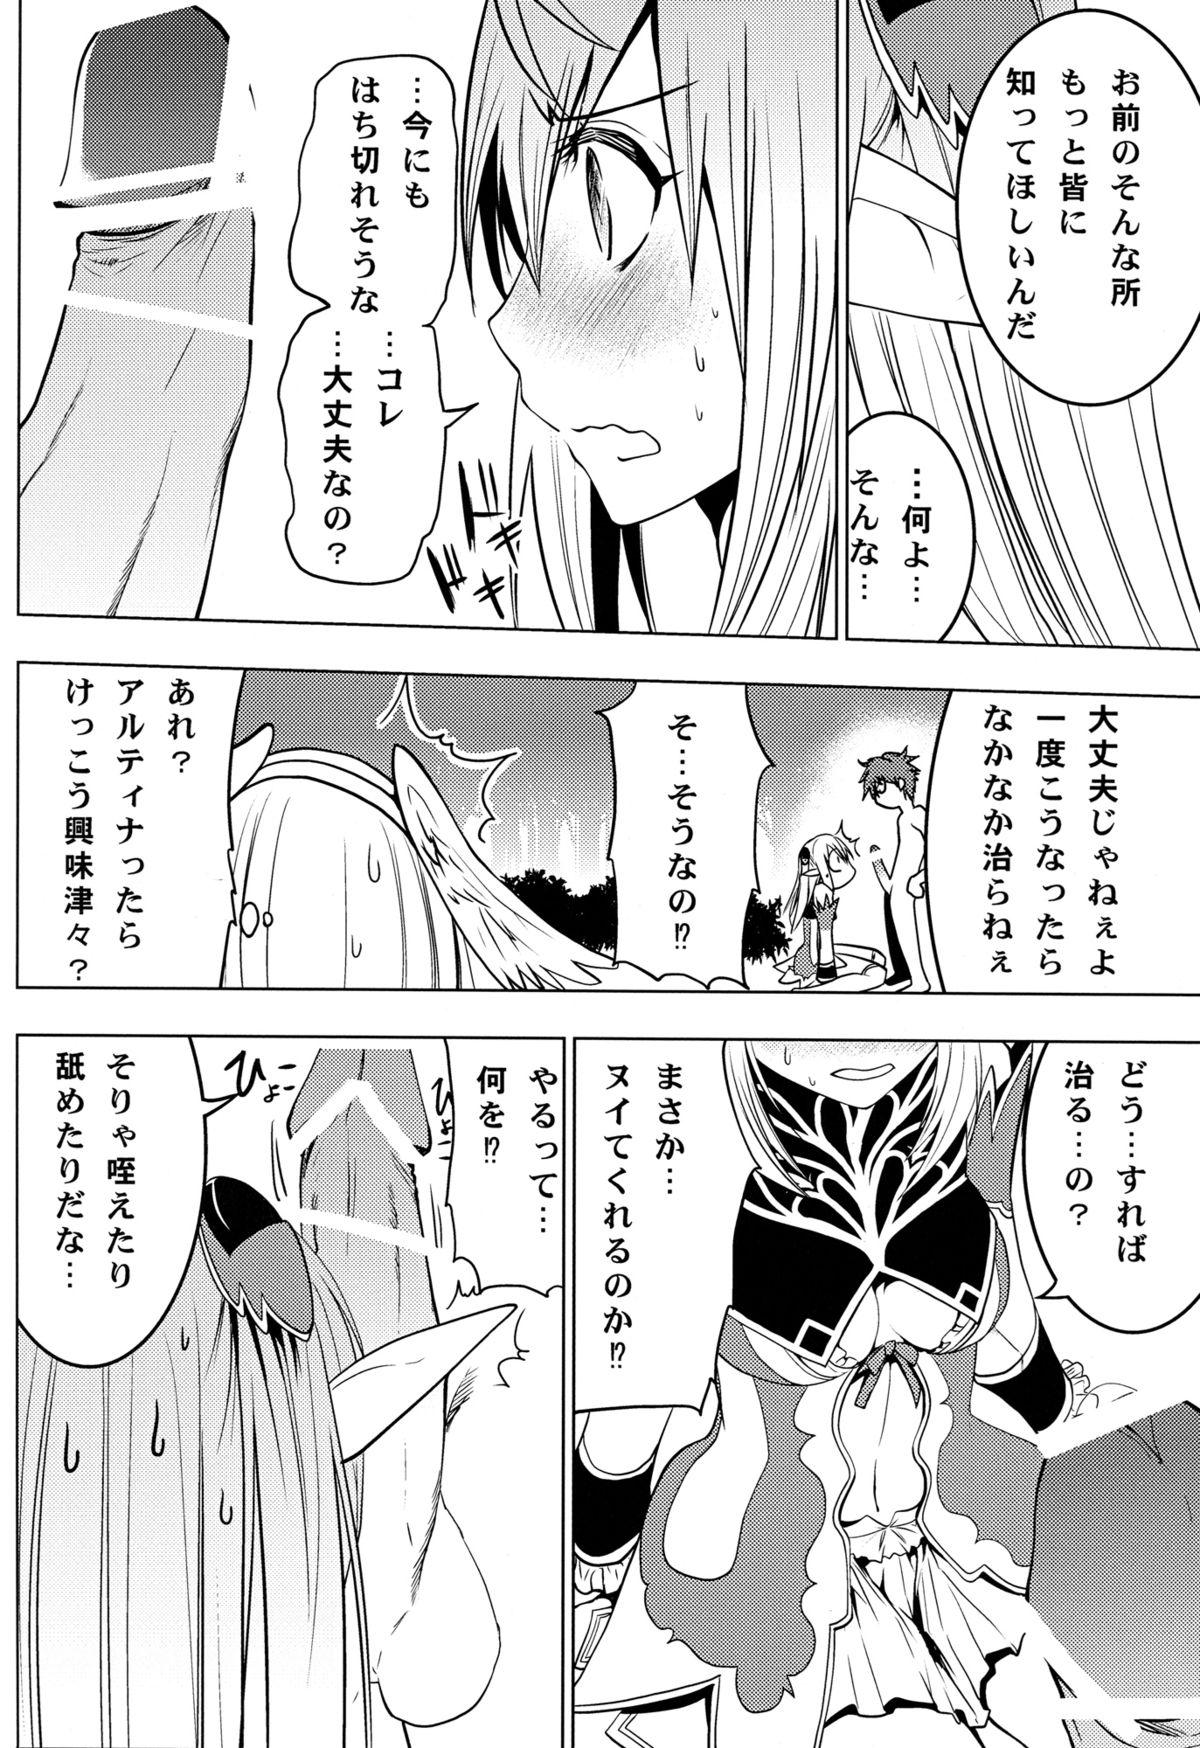 One Altina Weapon - Shining blade Couple Porn - Page 10